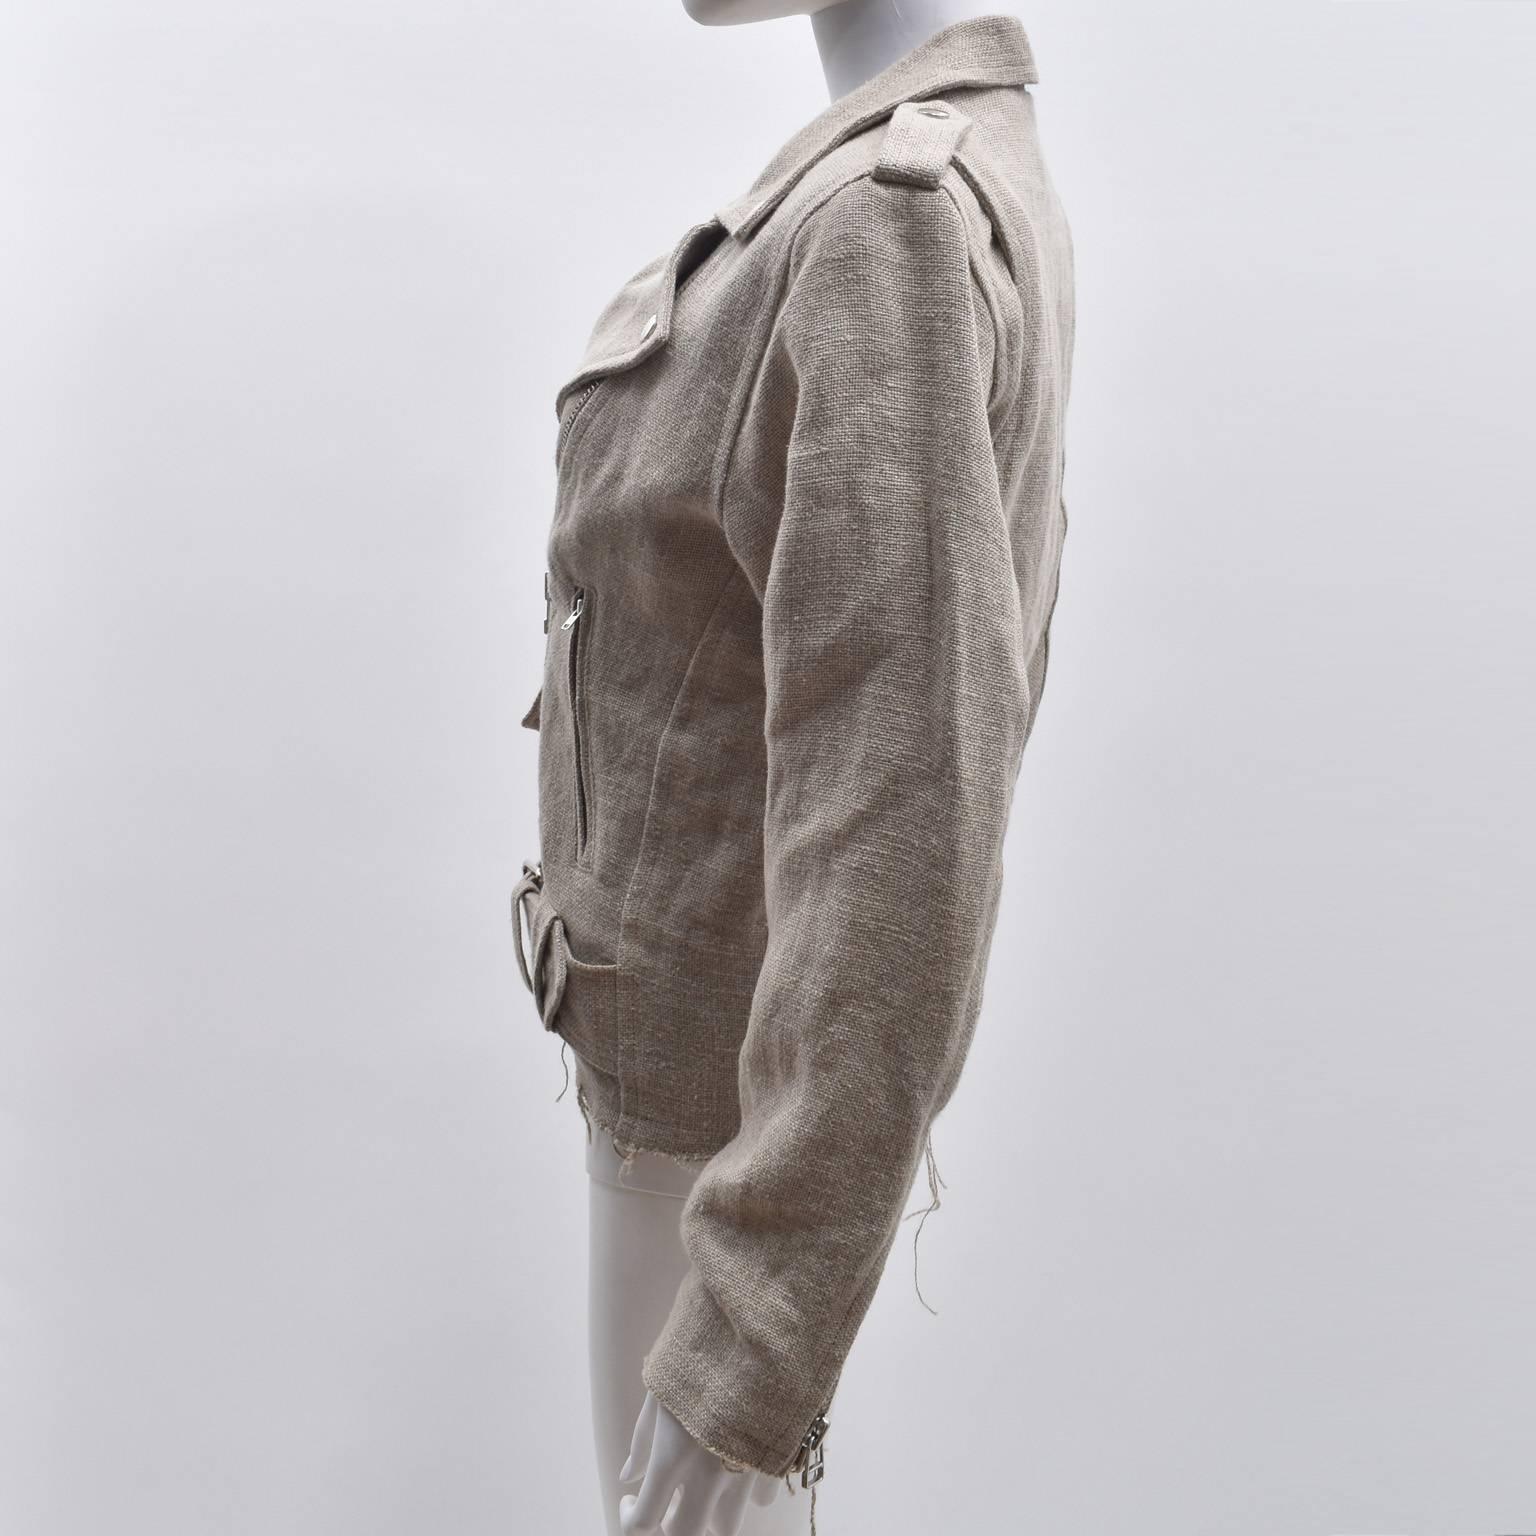 A beige raw linen jacket that is a beautiful twist on a classic biker jacket from British label Marques Almeida. The jacket has a typical biker jacket design with cropped shape, notched collar, asymmetric zip fastening, belt with buckles and